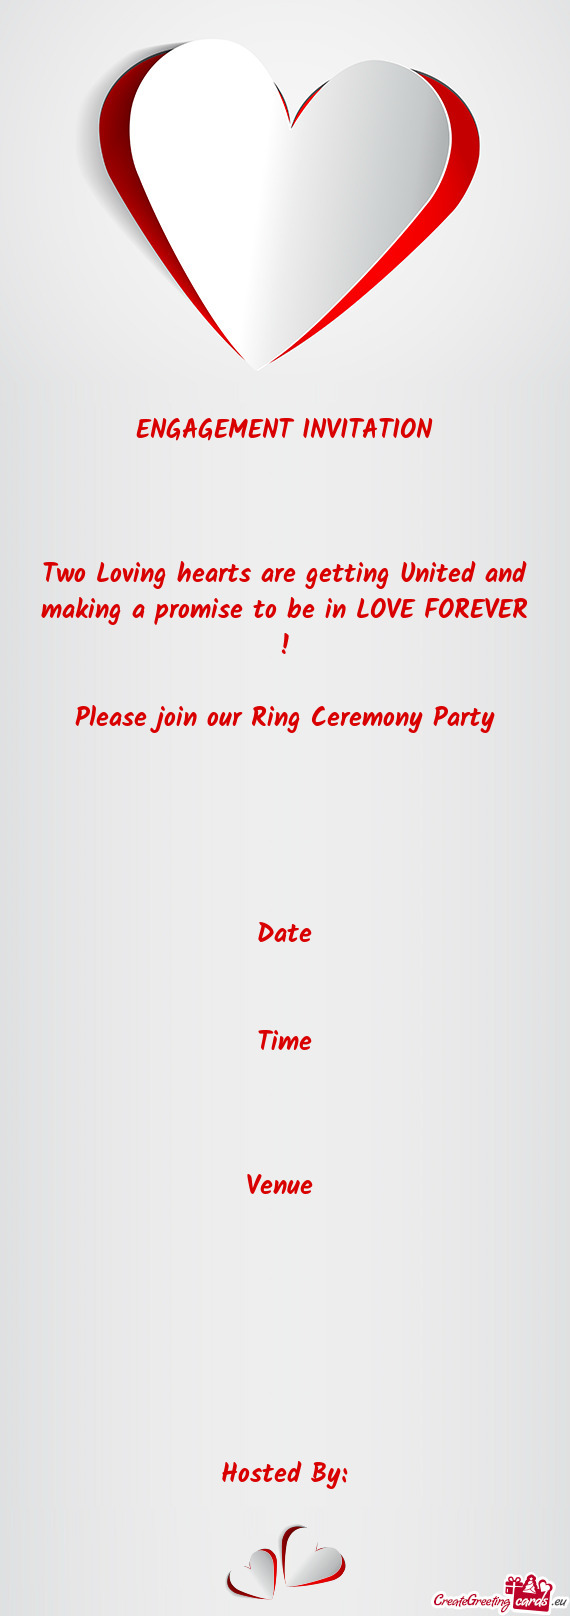 E FOREVER !  Please join our Ring Ceremony Party      Date   Time    Venue